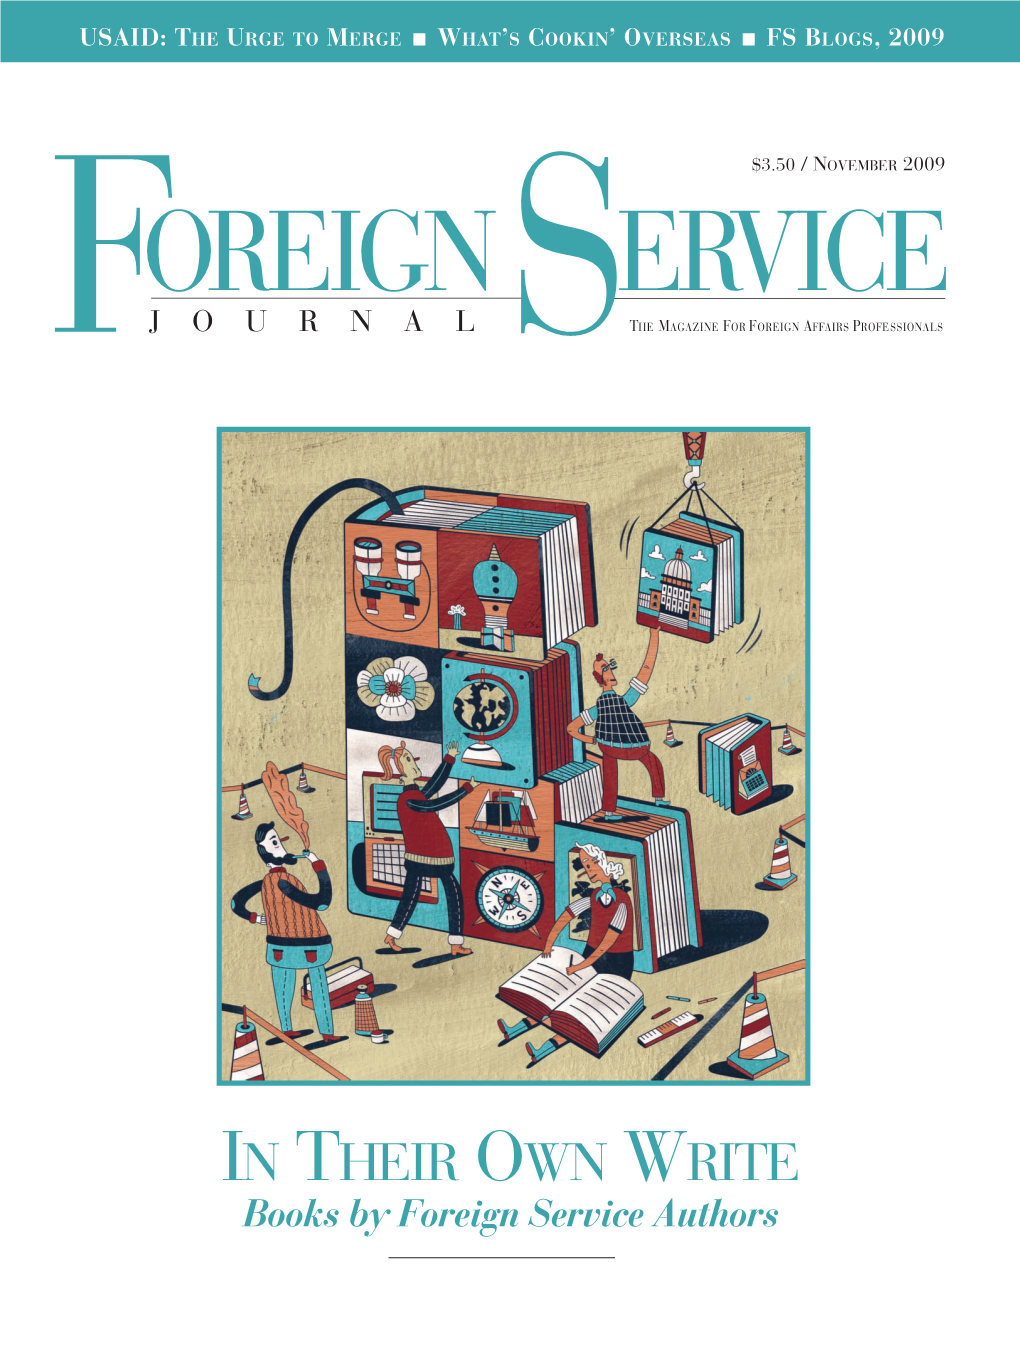 The Foreign Service Journal, November 2009